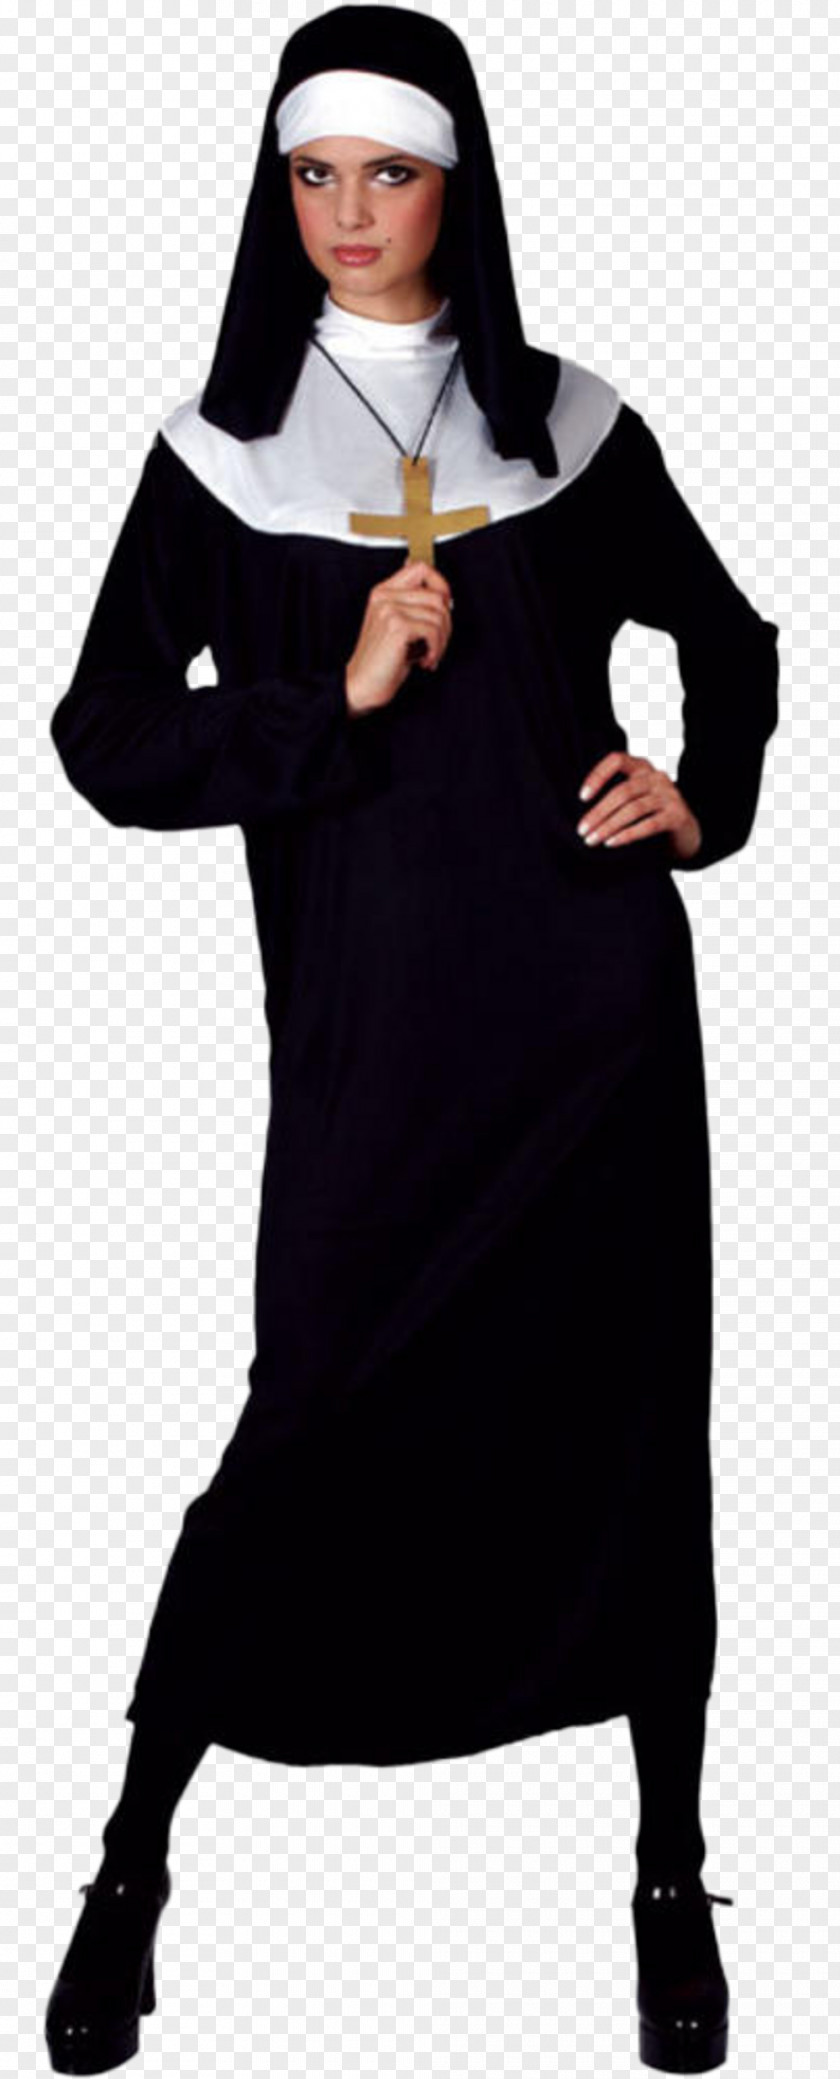 Fancy Dress Costume Party Mother Superior Nun Clothing PNG